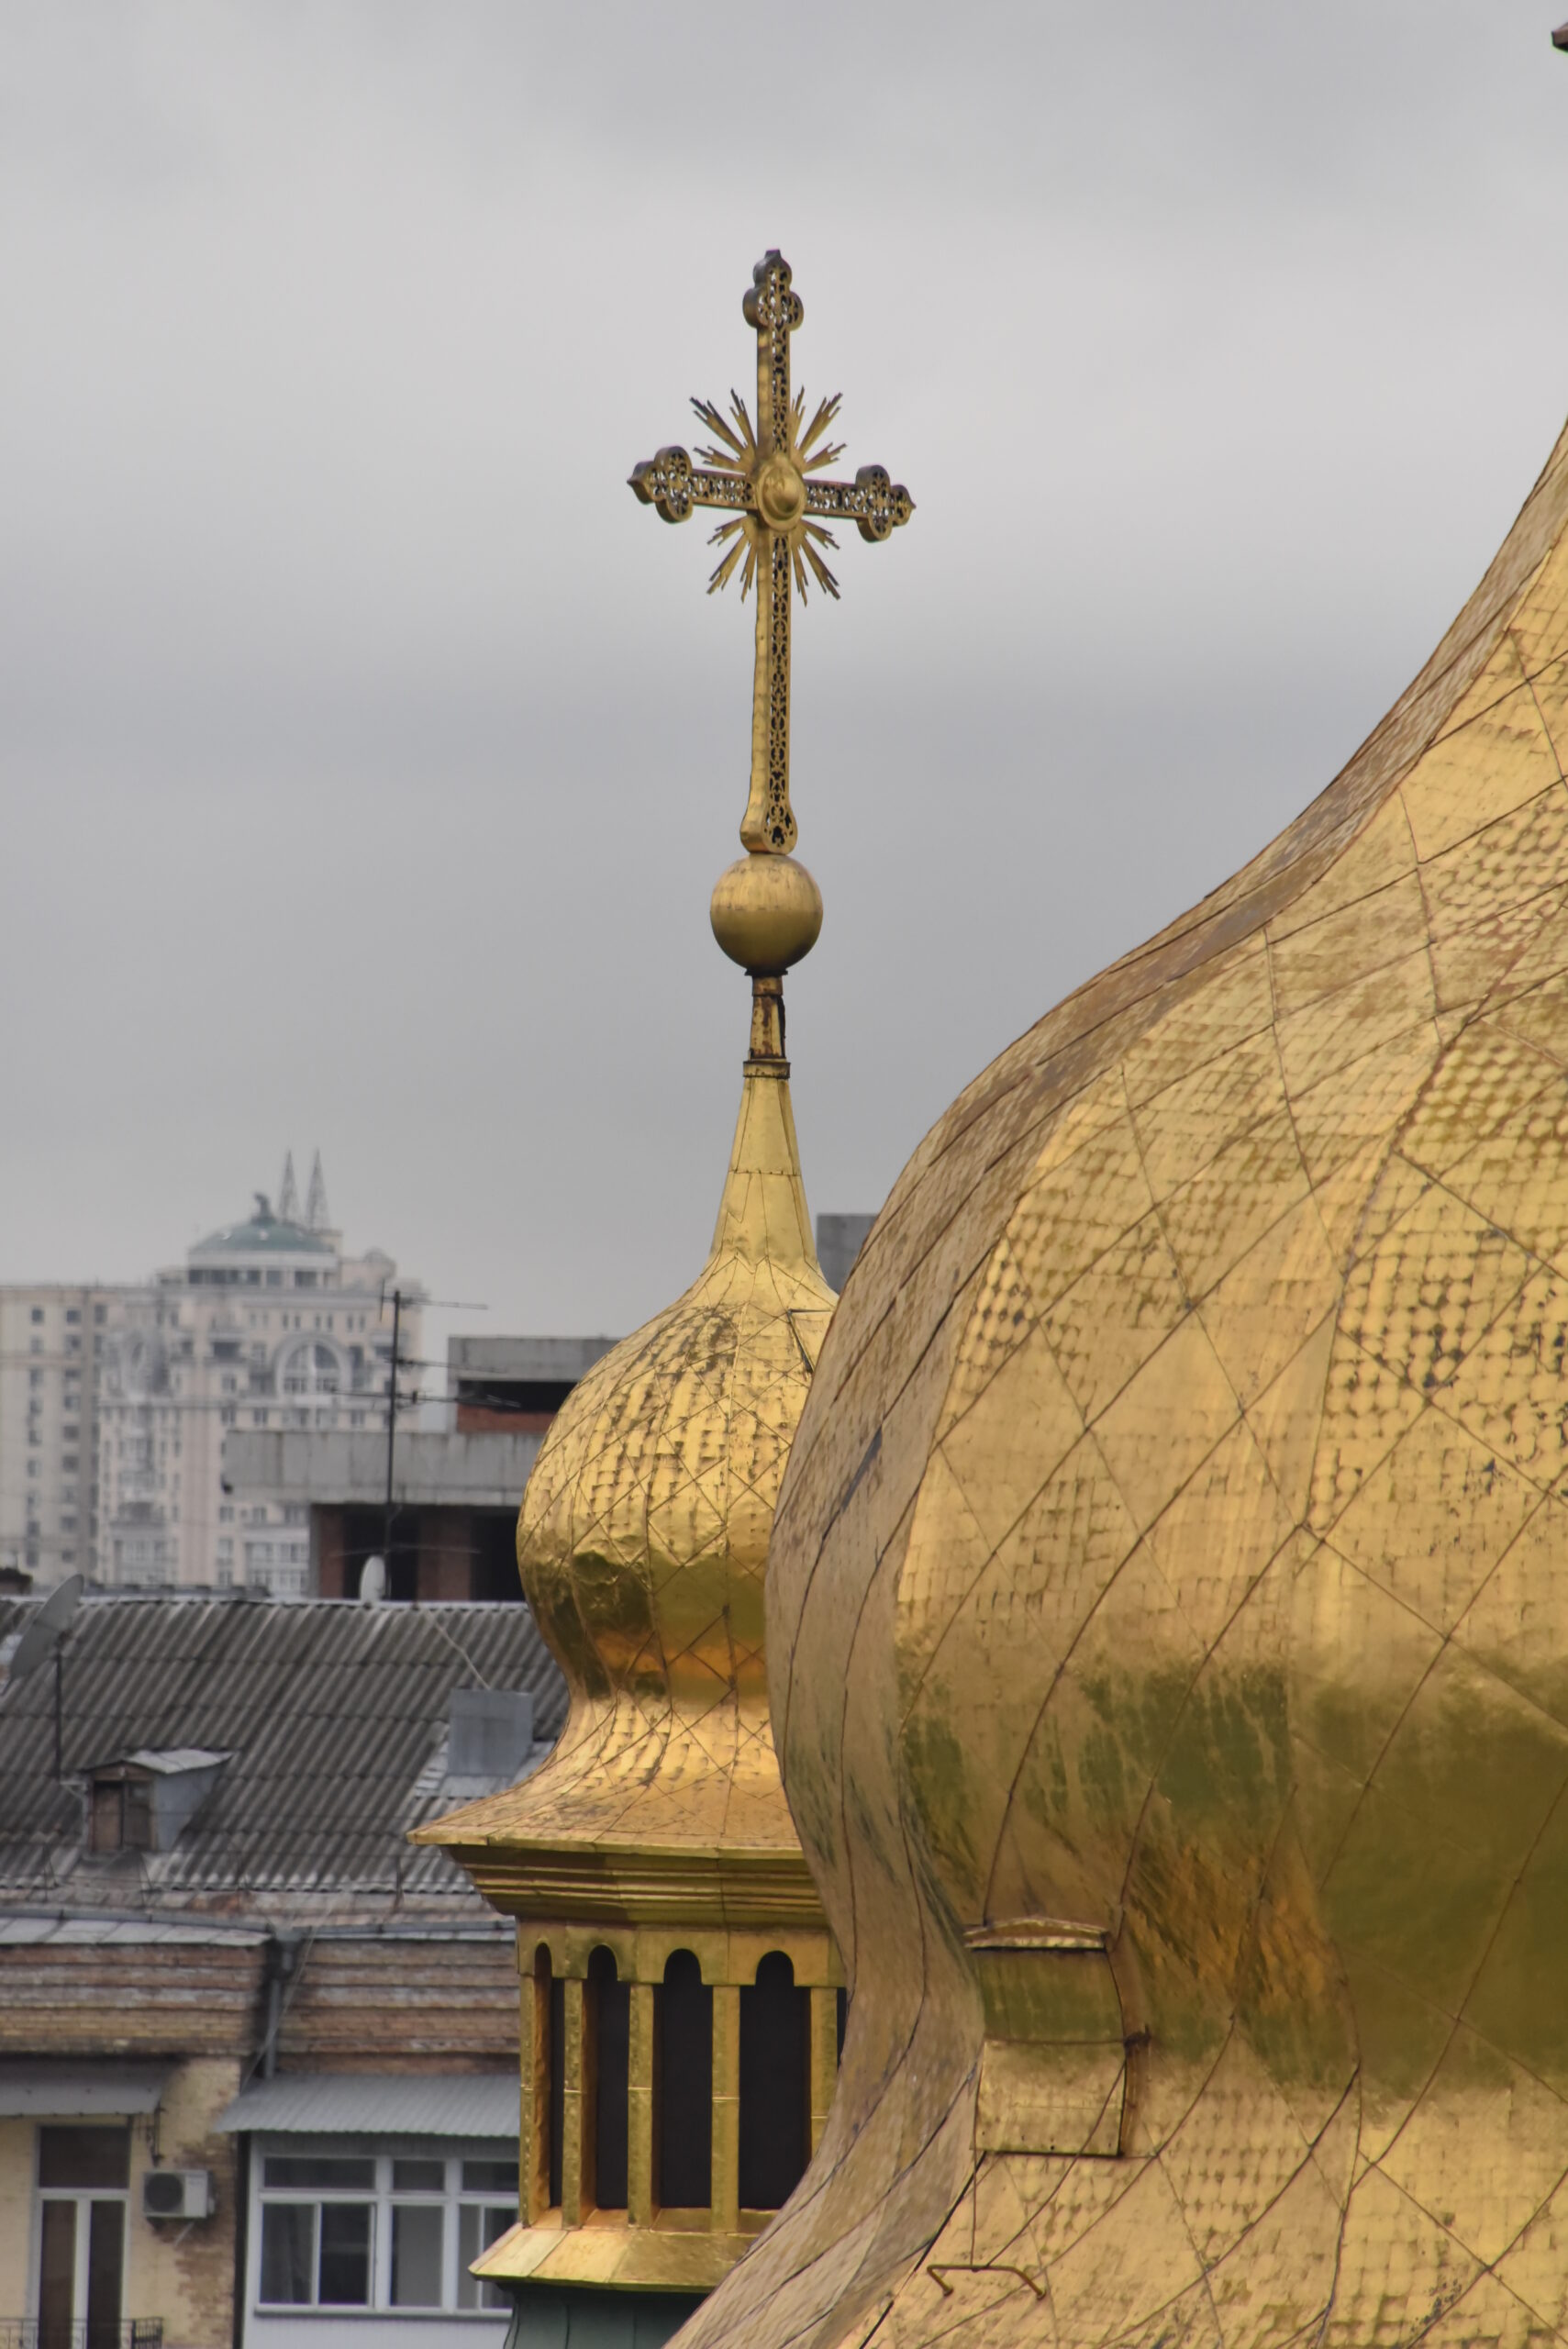 Golden domes of a Cathedral with cross.